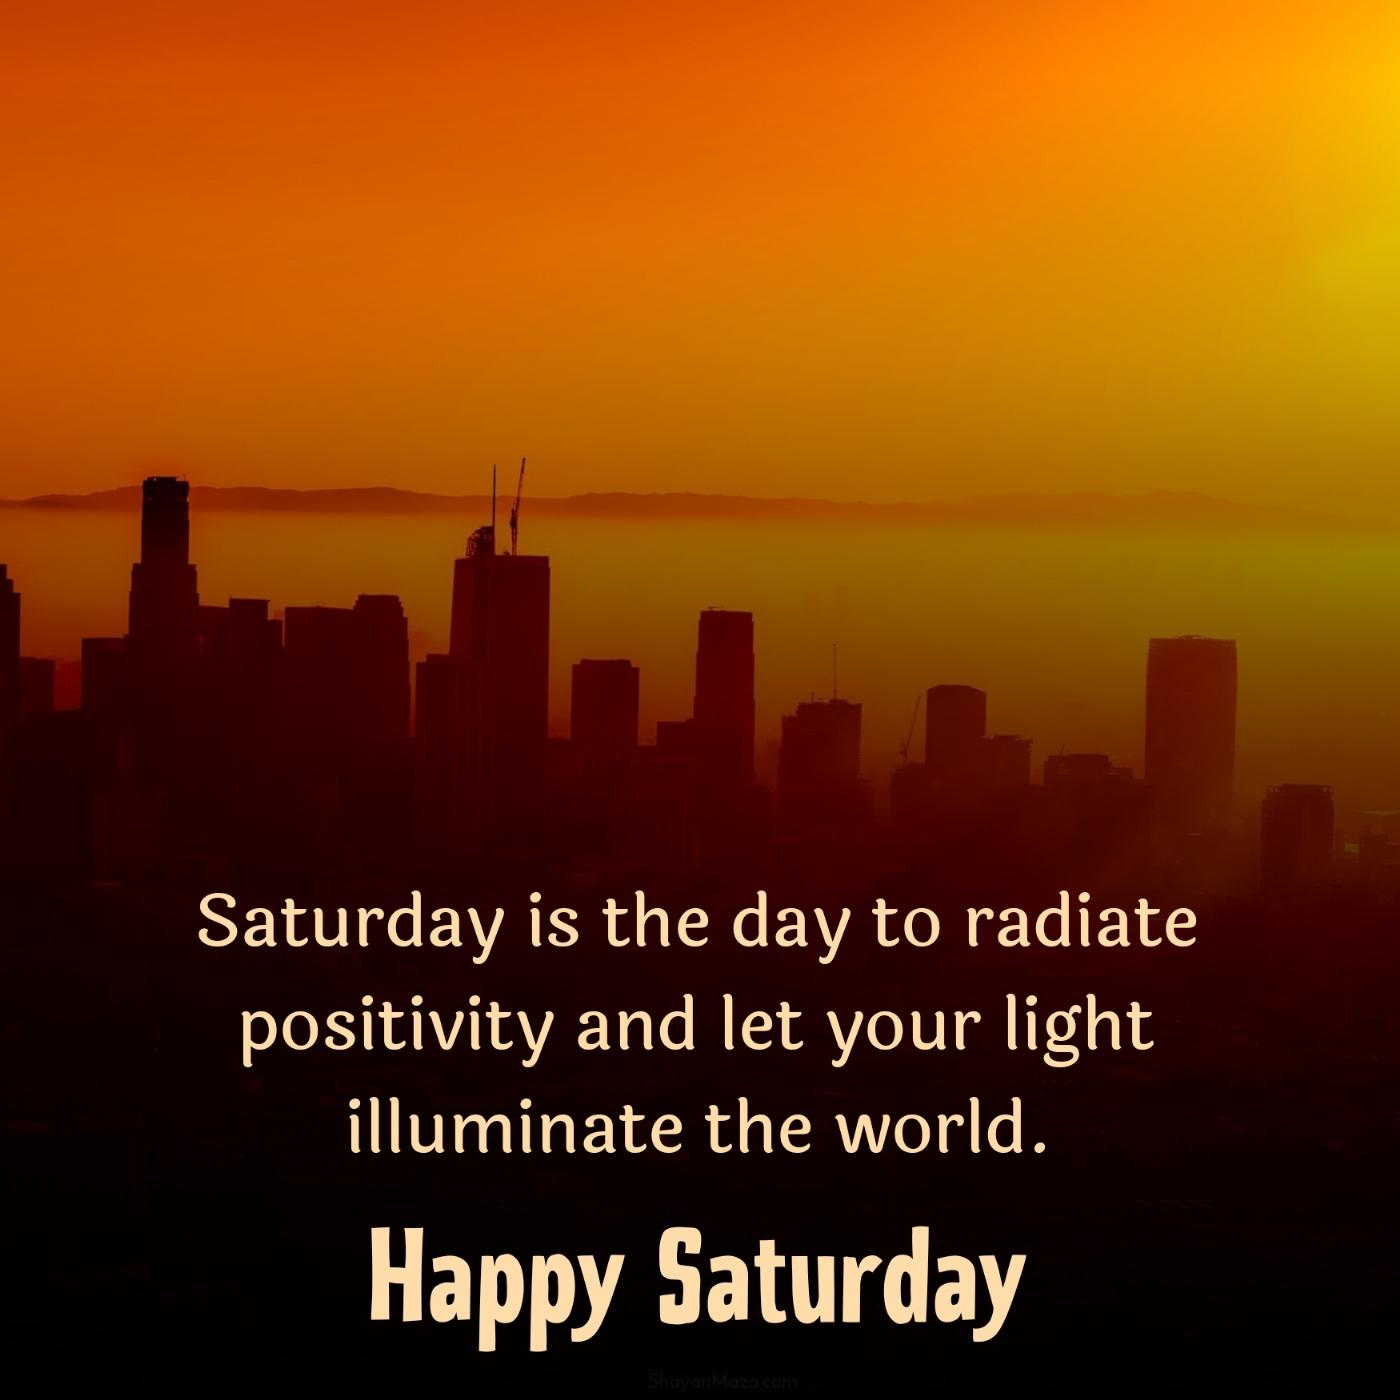 Saturday is the day to radiate positivity and let your light illuminate